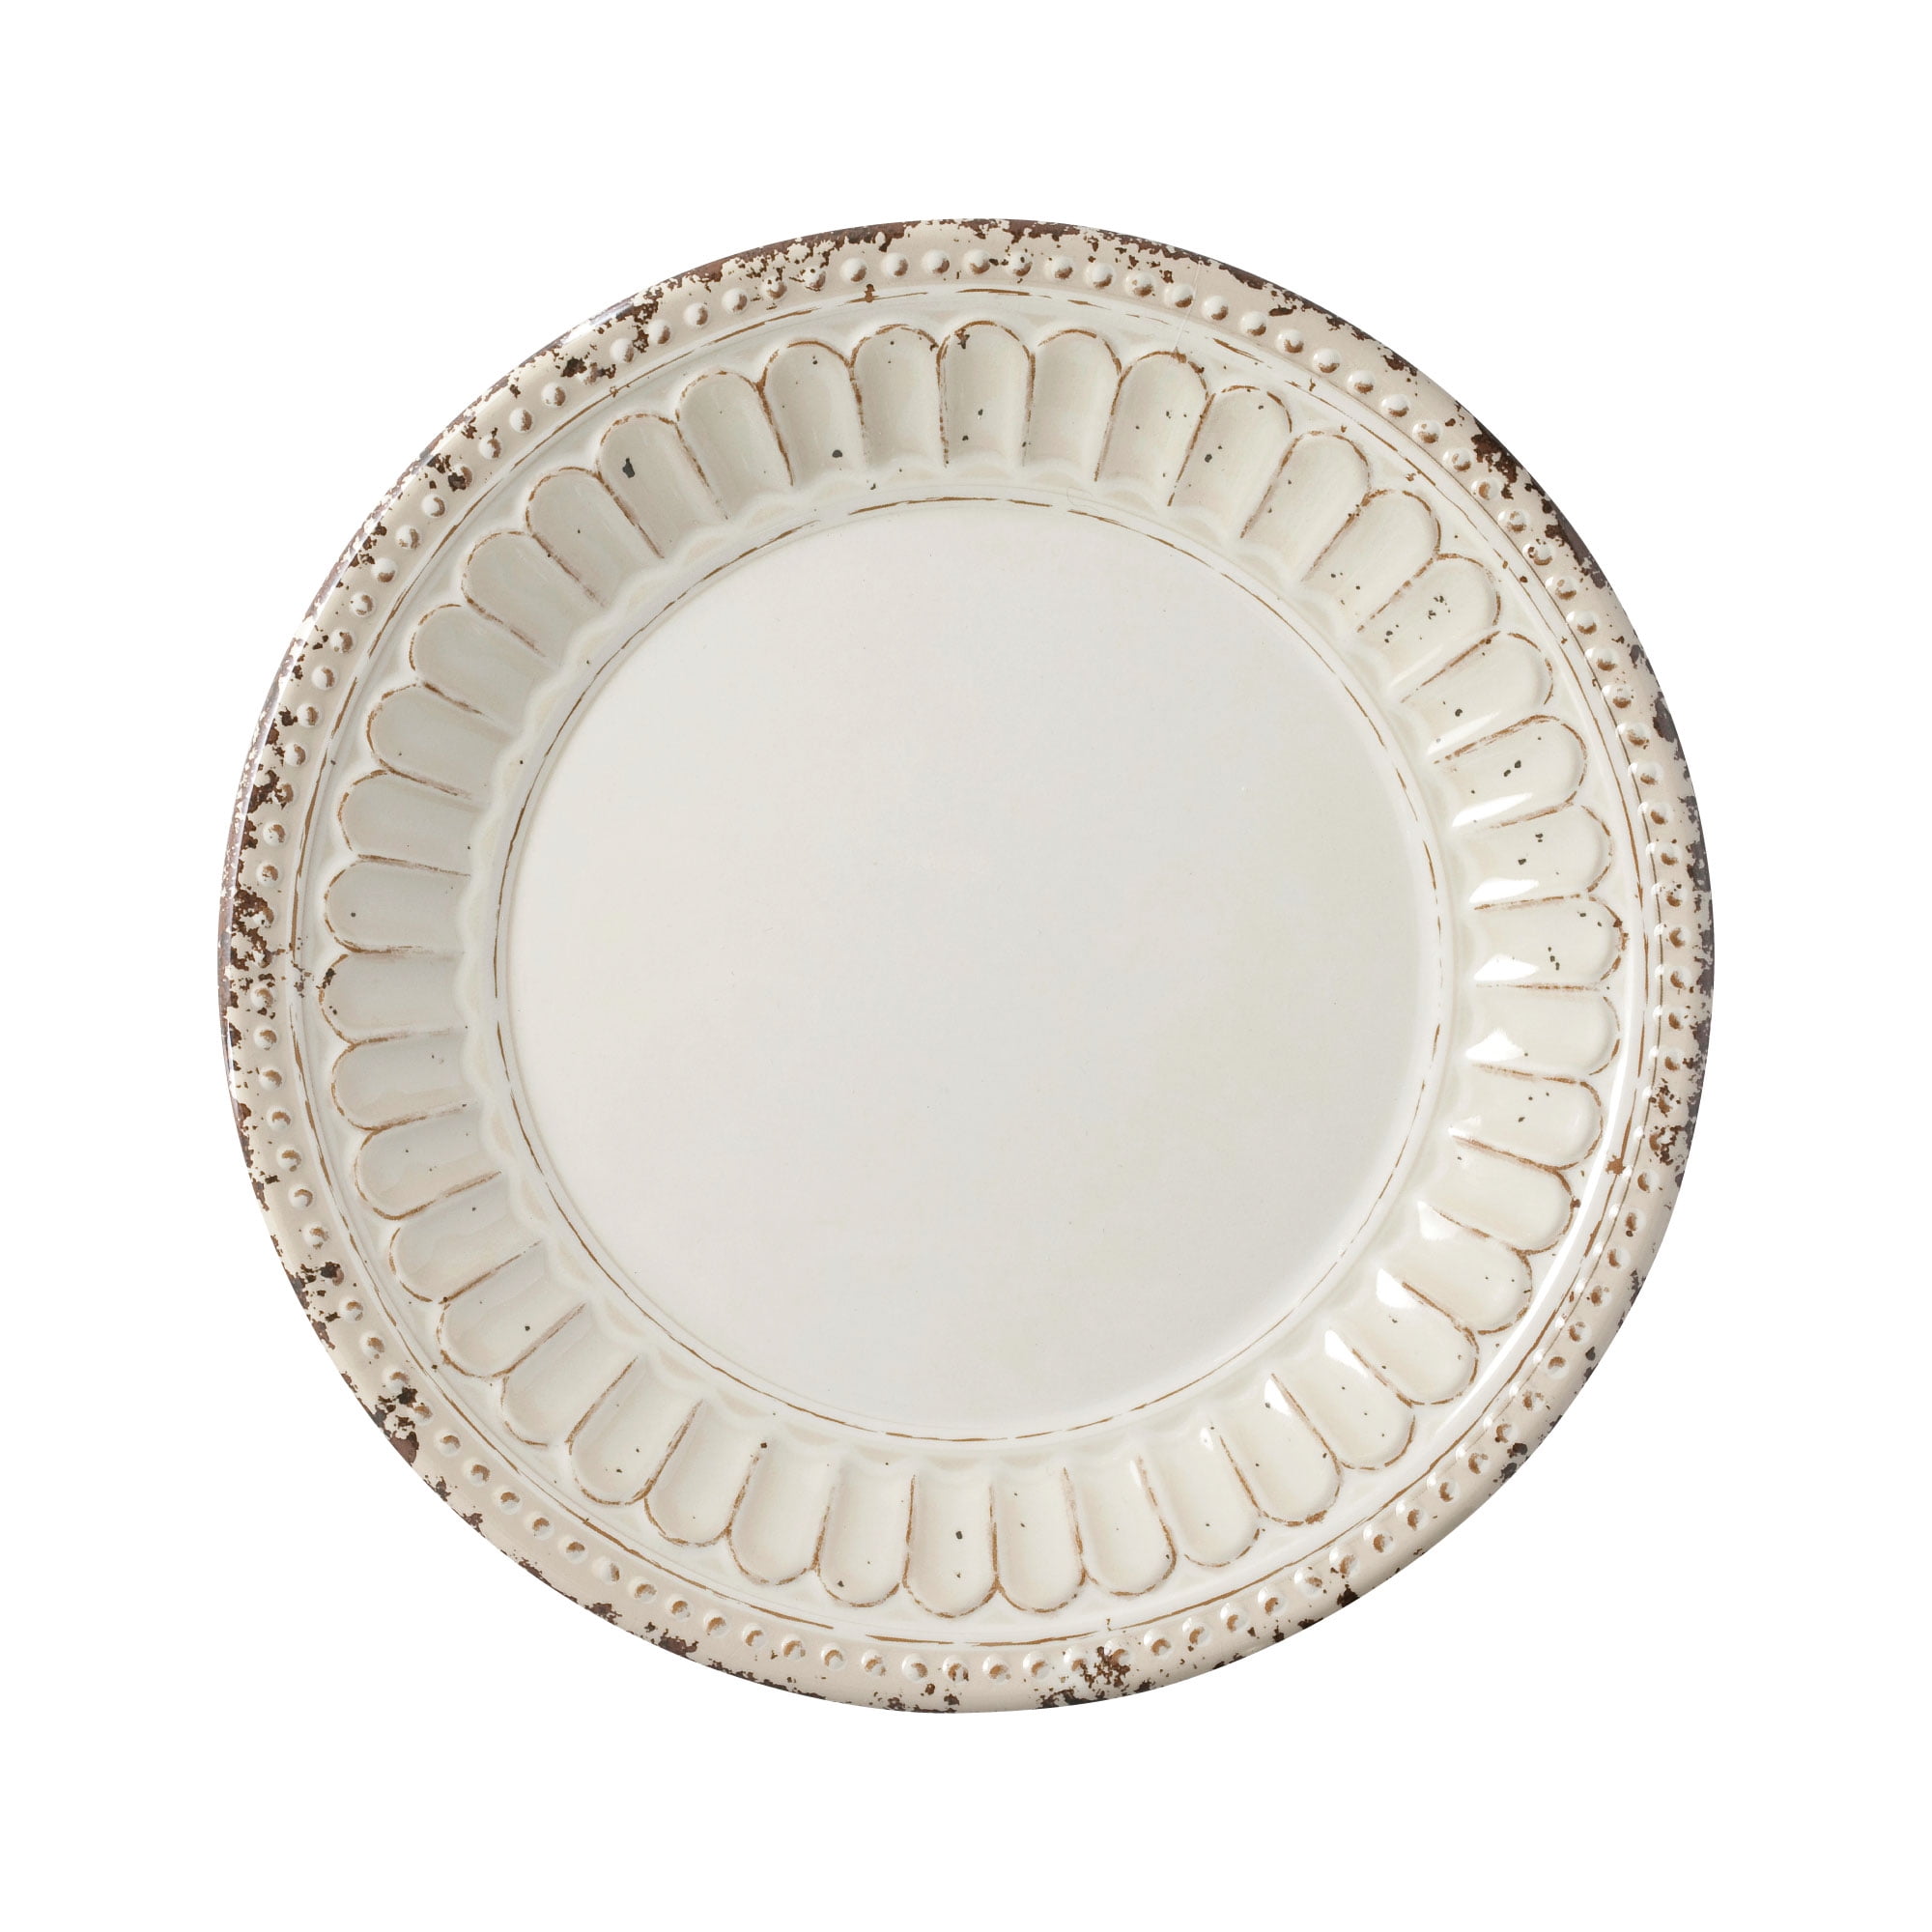 Dessert 2022 Includes Dinner Plates set for 4 16-Piece Beaded Chateau Heavyweight and Durable Melamine Dinnerware Set Salad Plates Sand